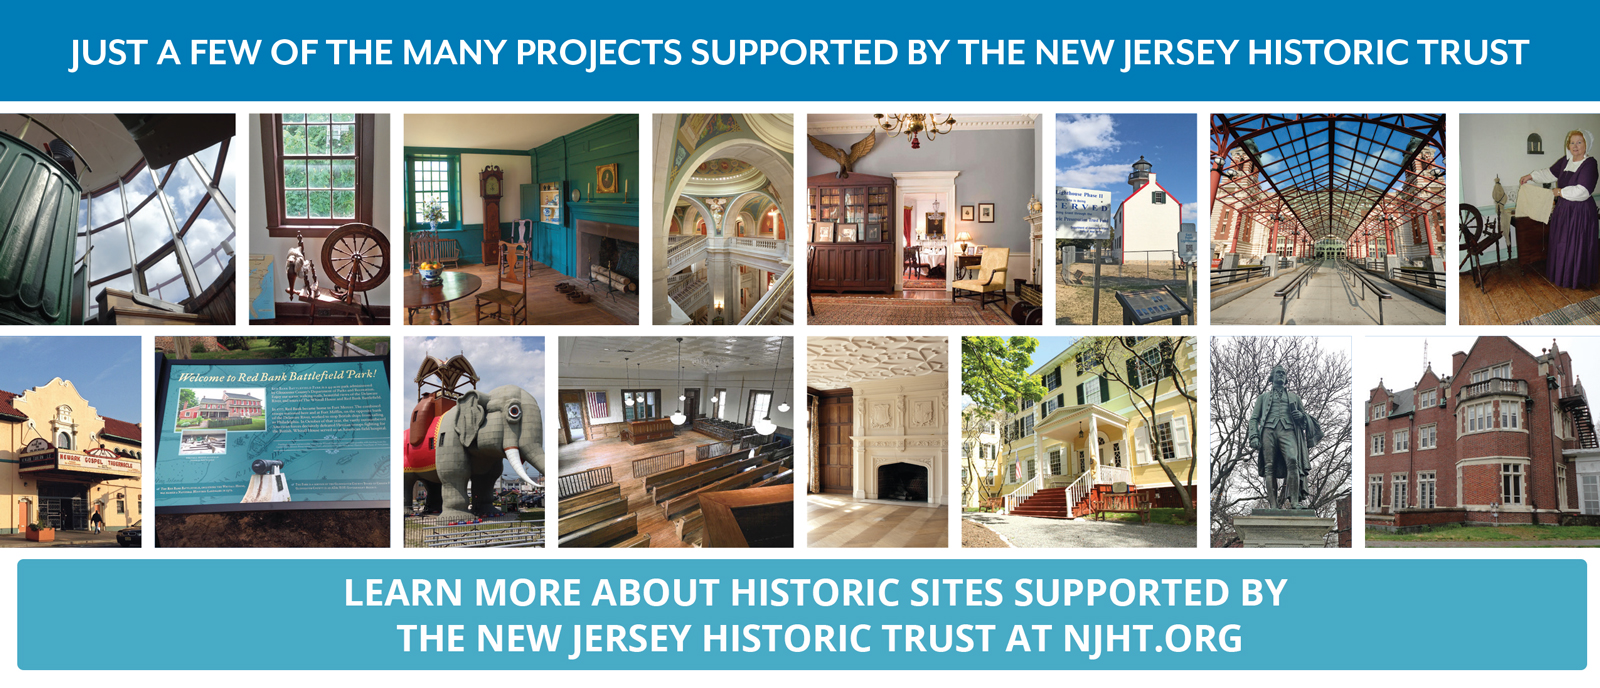 Just a few of the many projects supported by the New Jersey Historic Trust